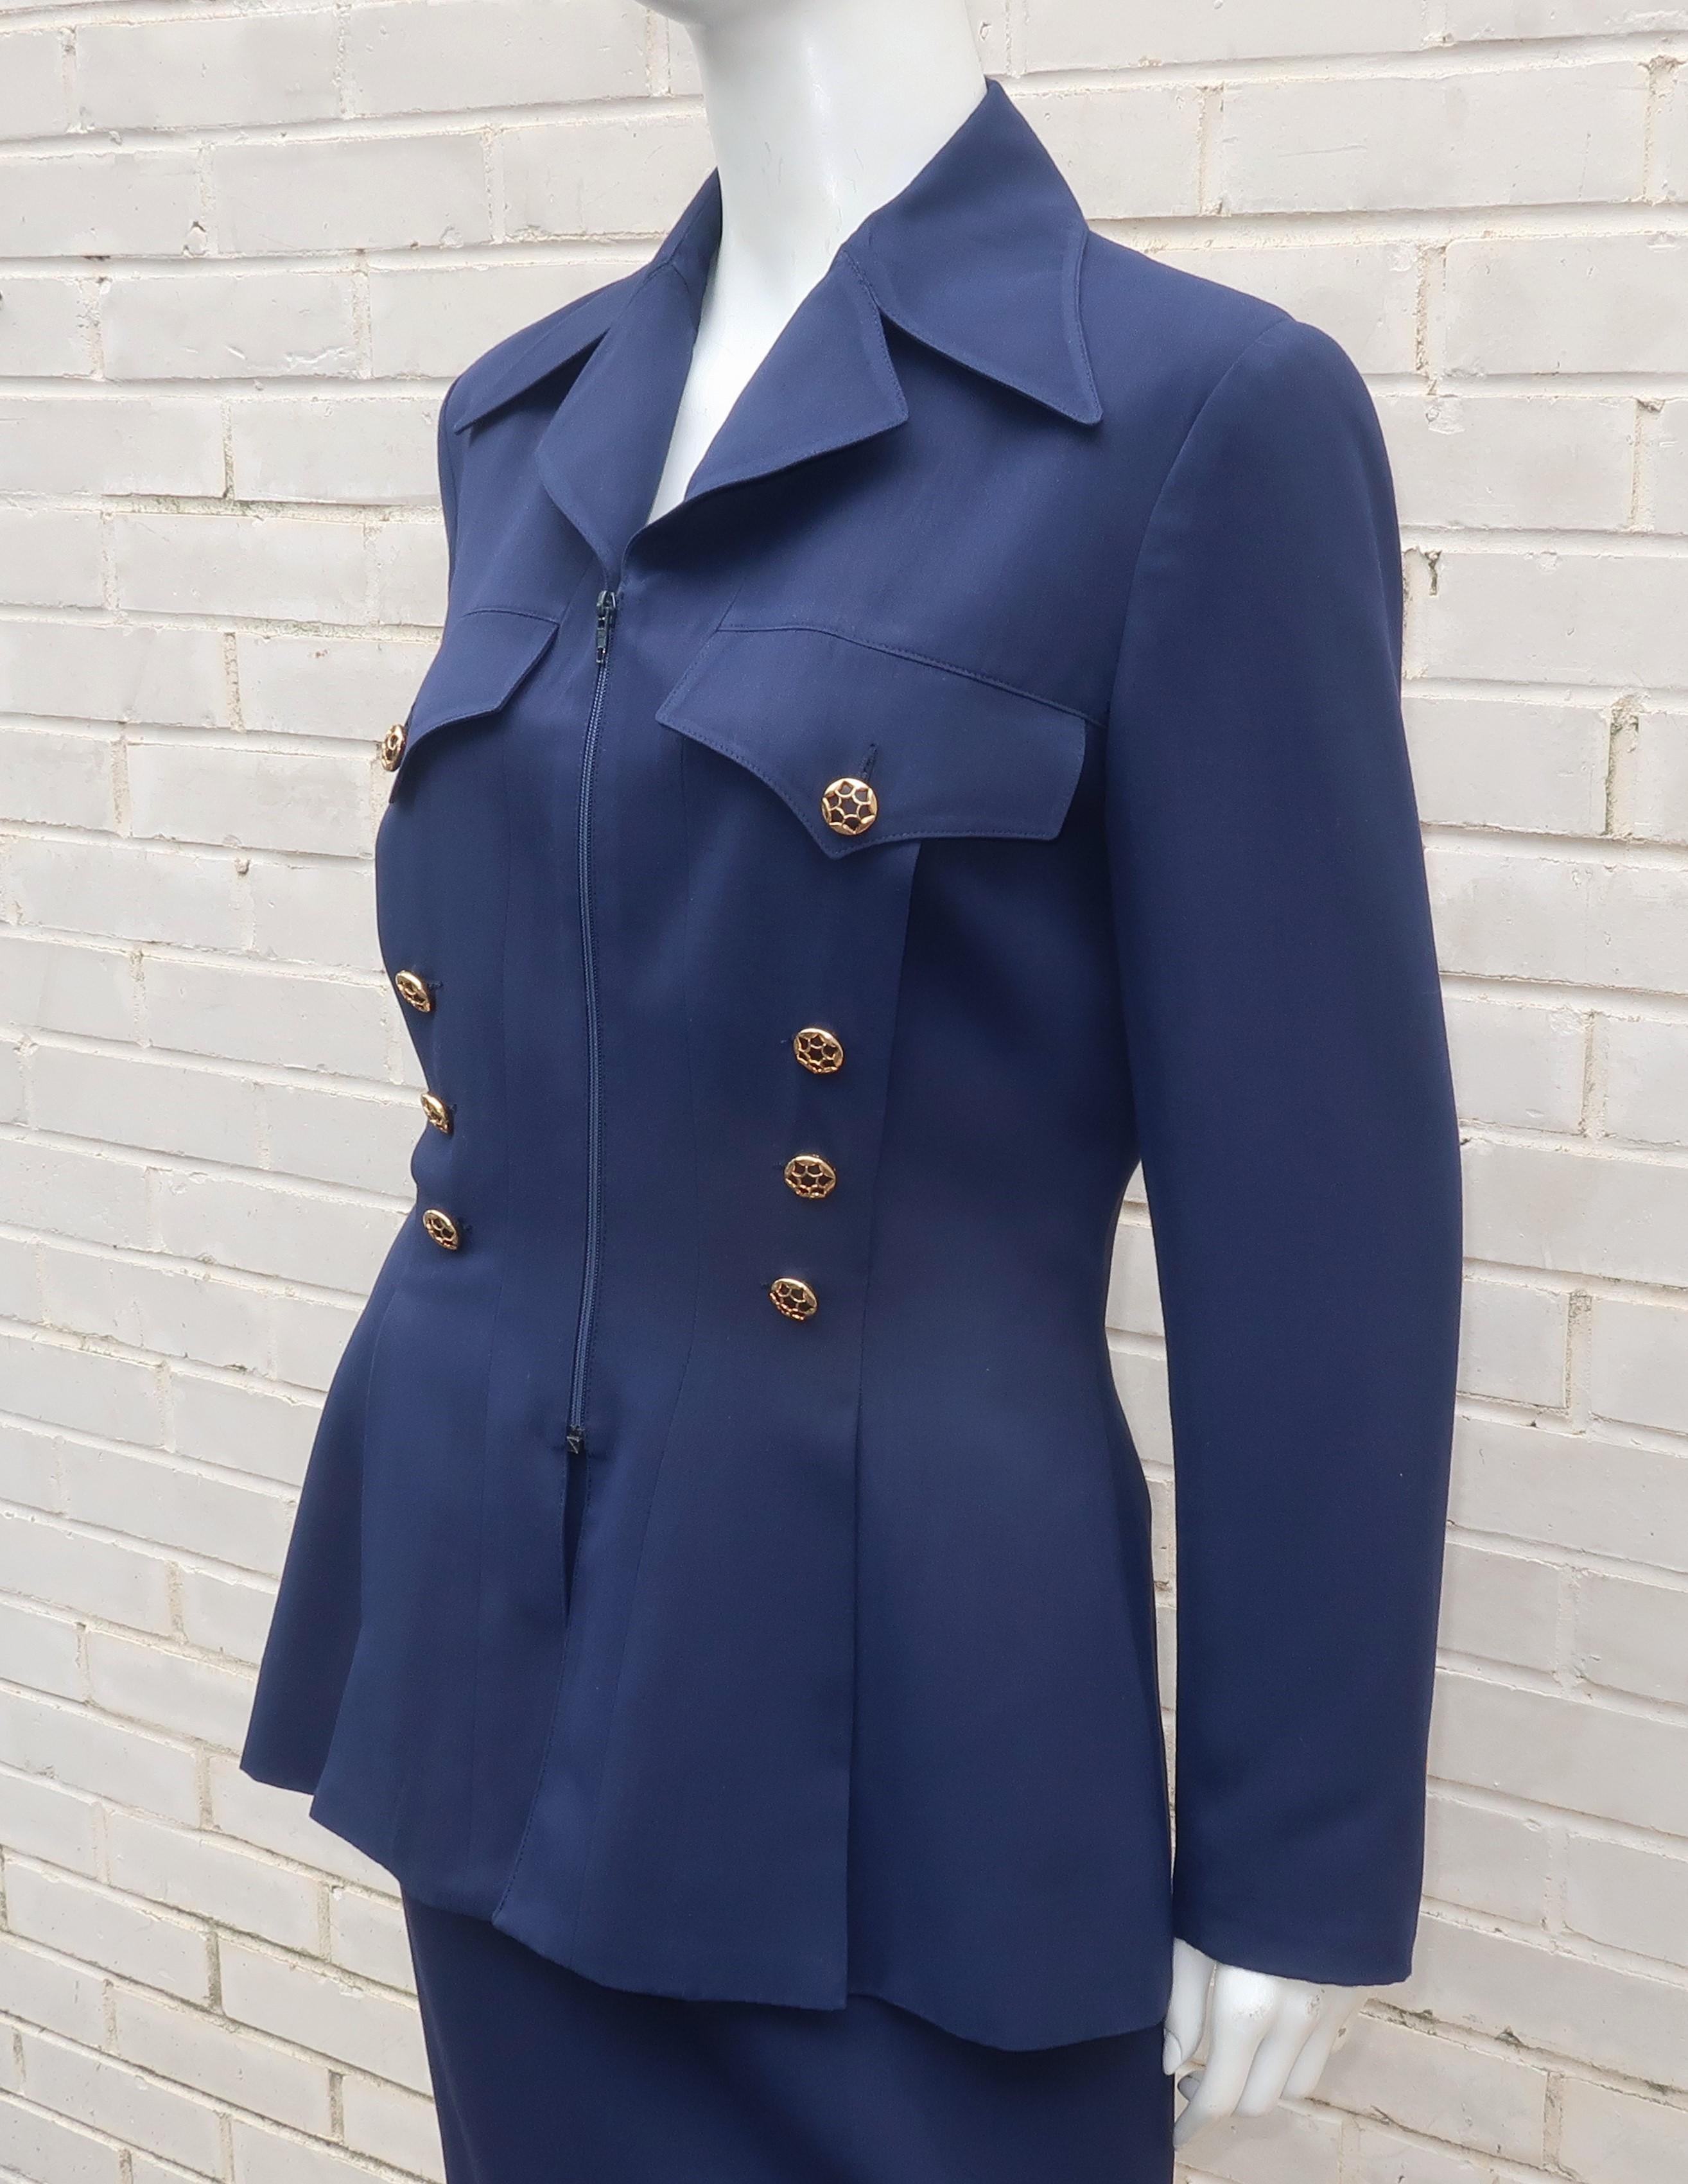 Purple Karl Lagerfeld Navy Blue Skirt Suit With Gold Buttons